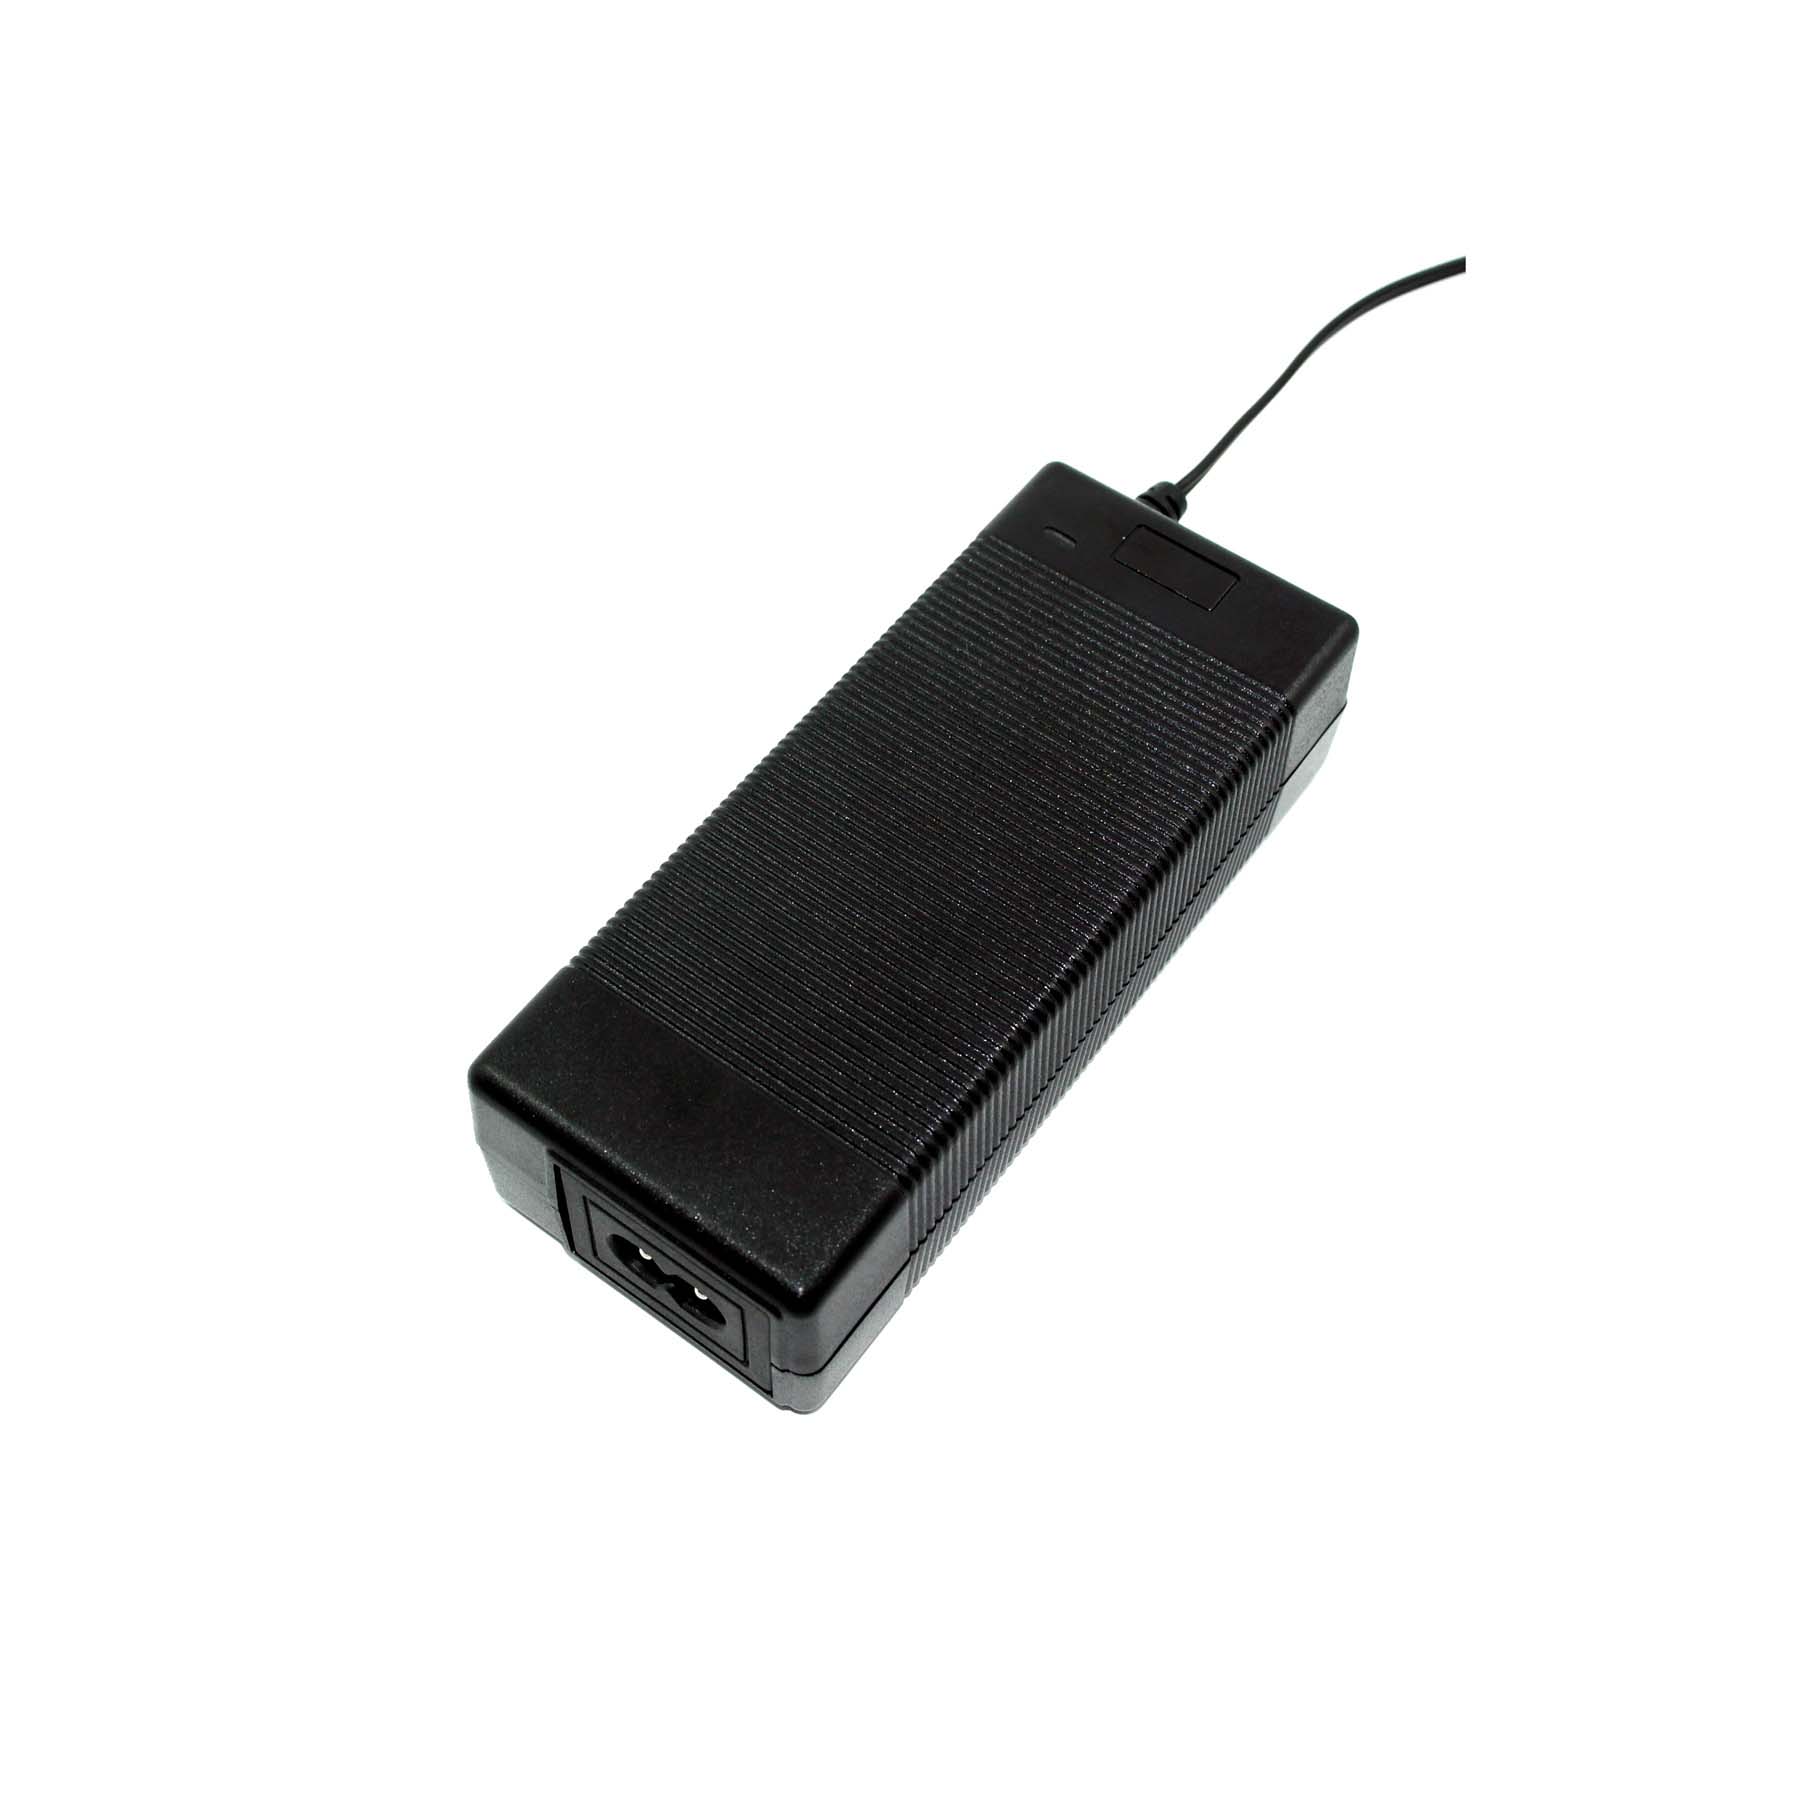 KRE2402000D,24V 2.0A 48W Switching power supply, power adapter CE FCC EMC ROHS